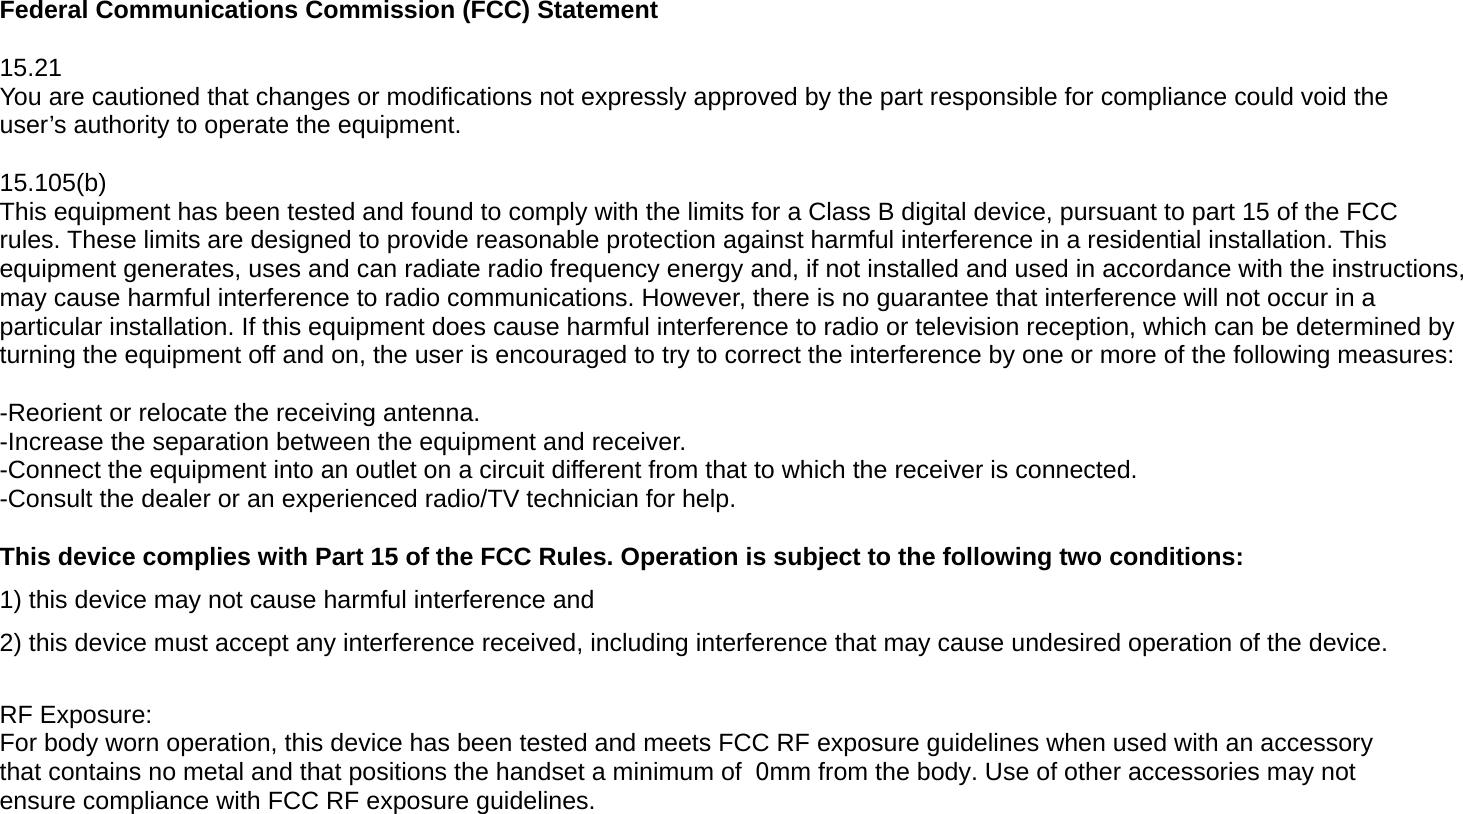 Federal Communications Commission (FCC) Statement 15.21 You are cautioned that changes or modifications not expressly approved by the part responsible for compliance could void the user’s authority to operate the equipment. 15.105(b) This equipment has been tested and found to comply with the limits for a Class B digital device, pursuant to part 15 of the FCC rules. These limits are designed to provide reasonable protection against harmful interference in a residential installation. This equipment generates, uses and can radiate radio frequency energy and, if not installed and used in accordance with the instructions, may cause harmful interference to radio communications. However, there is no guarantee that interference will not occur in a particular installation. If this equipment does cause harmful interference to radio or television reception, which can be determined by turning the equipment off and on, the user is encouraged to try to correct the interference by one or more of the following measures: -Reorient or relocate the receiving antenna. -Increase the separation between the equipment and receiver. -Connect the equipment into an outlet on a circuit different from that to which the receiver is connected. -Consult the dealer or an experienced radio/TV technician for help. This device complies with Part 15 of the FCC Rules. Operation is subject to the following two conditions: 1) this device may not cause harmful interference and2) this device must accept any interference received, including interference that may cause undesired operation of the device.RF Exposure: For body worn operation, this device has been tested and meets FCC RF exposure guidelines when used with an accessory that contains no metal and that positions the handset a minimum of  0mm from the body. Use of other accessories may not ensure compliance with FCC RF exposure guidelines. 